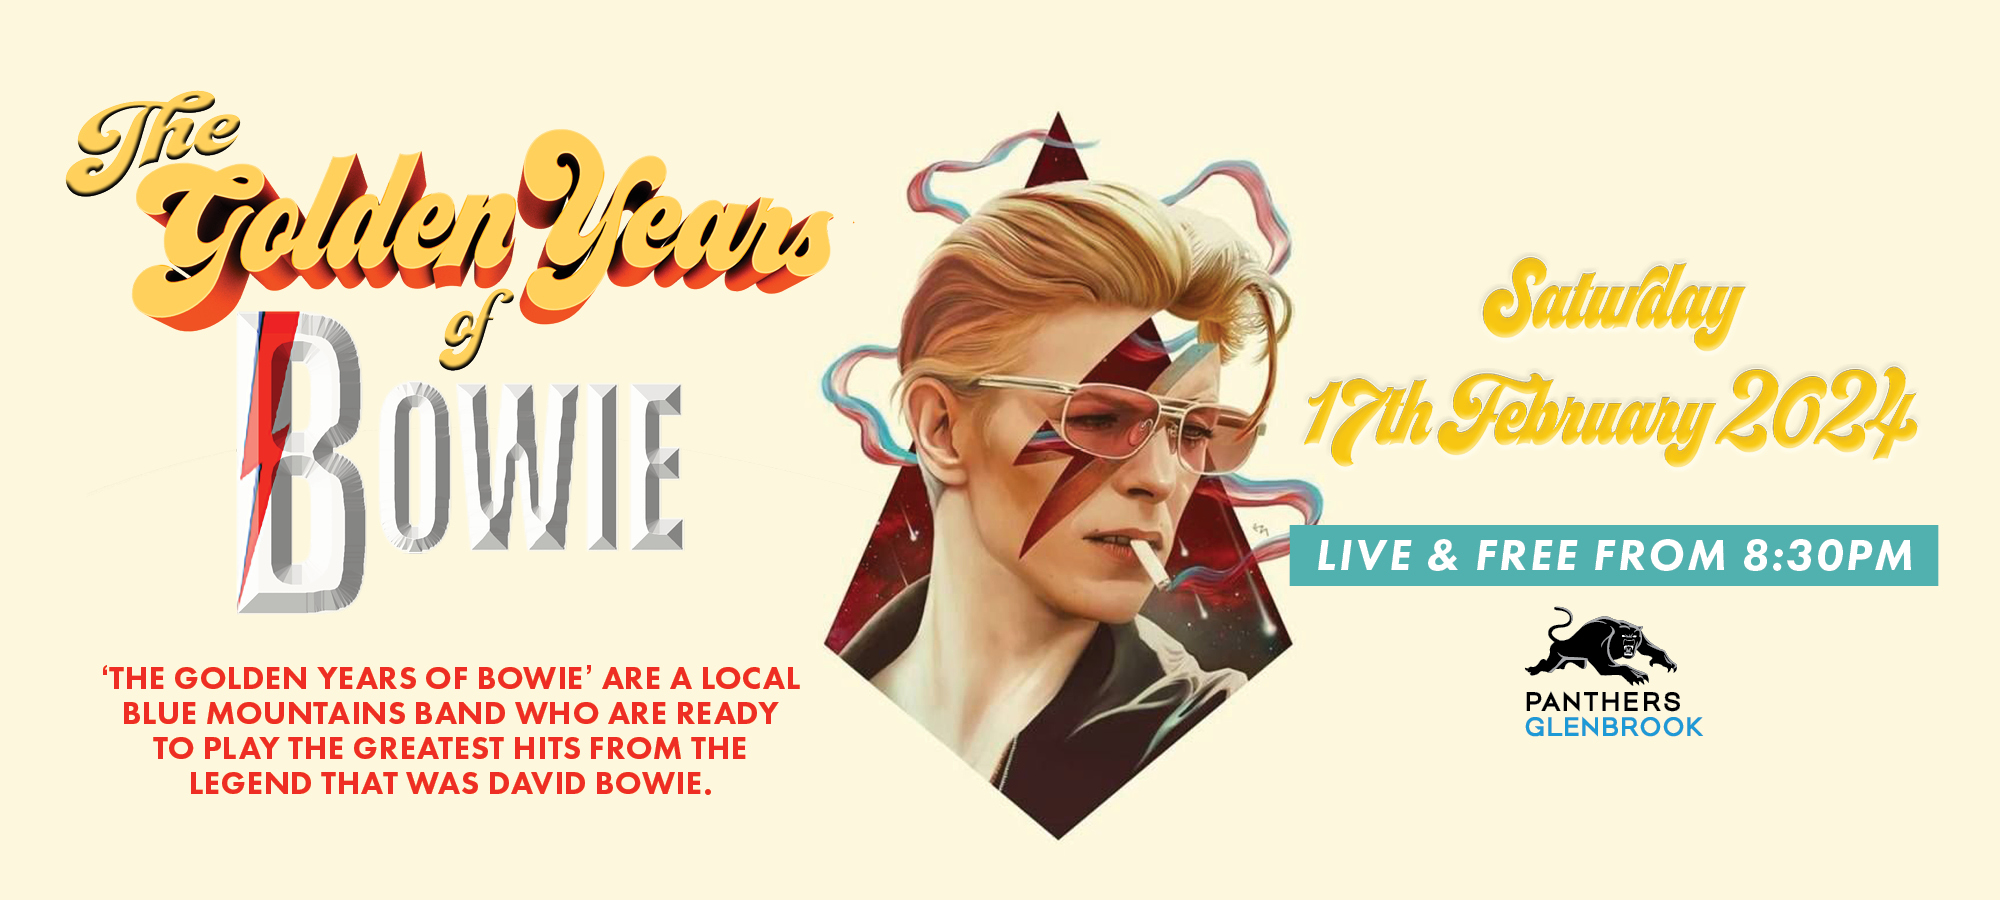 The Golden Years of Bowie – Saturday Live Entertainment in February